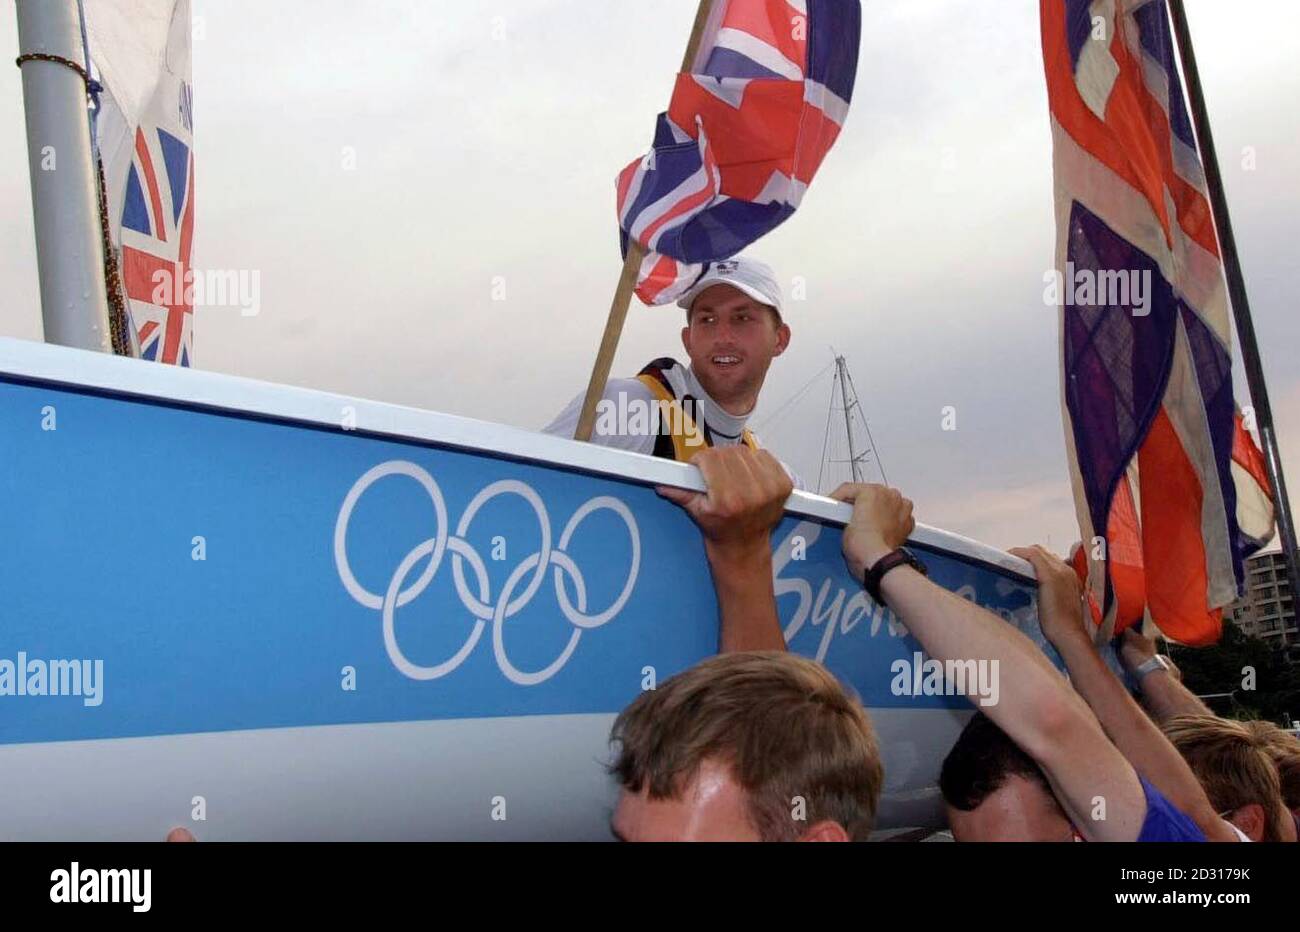 Great Britain's Ben Ainslie celebrates as his boat is carried ashore, following his final race in the Laser Sailing class at the Olympic Games in Rushcutters Bay, Sydney, Australia. He is waiting for the results of a protest after seeming to claim Gold medal.  * The 23 year old started the final race of the series nine points adrift of Brazilian Robert Scheidt. However, a brave and cunning piece of seamanship saw Ainslie pin the Brazilian at the back of the fleet, insuring Scheidt's previously discarded high fleet positions were brought back into the results summary. Stock Photo